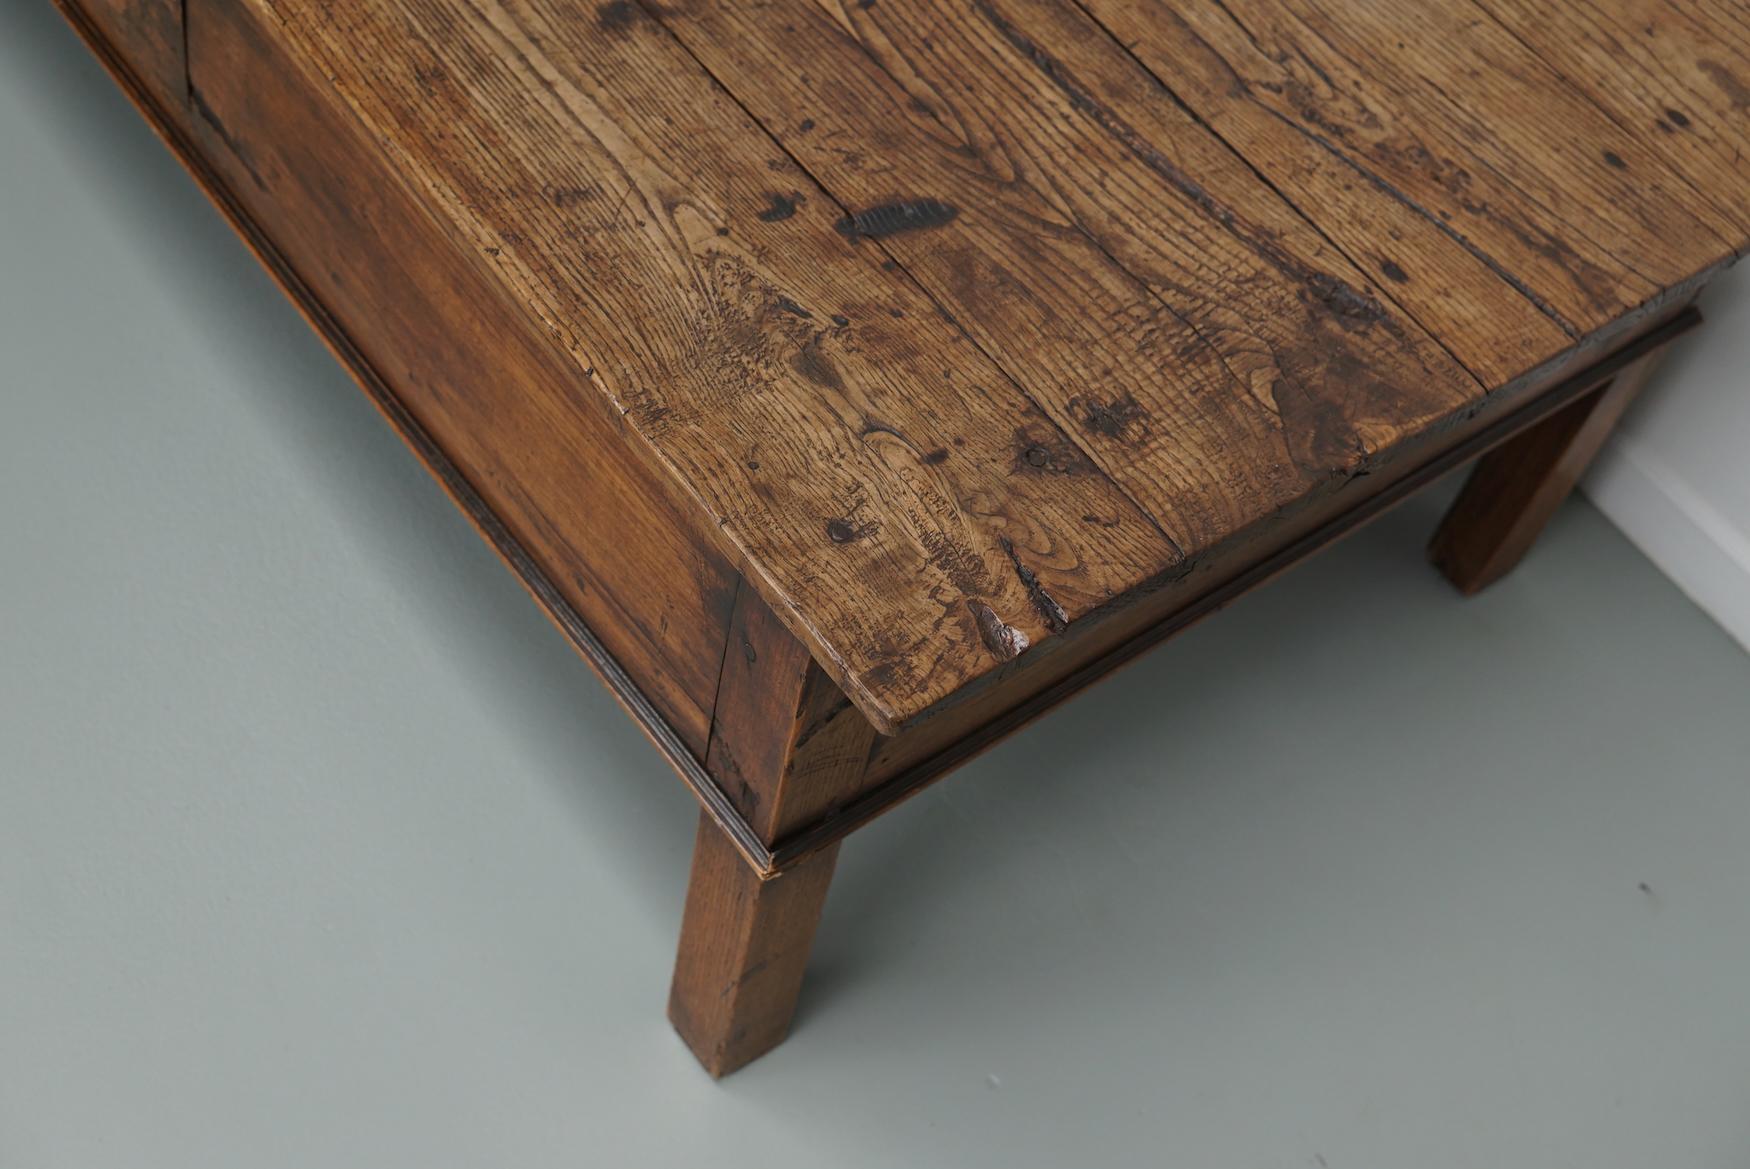 This coffee table was converted from an old 19th century chestnut farmhouse prepping table. It retained a very nice patina and rich color / fading over the years and has a practical size with a large drawer.